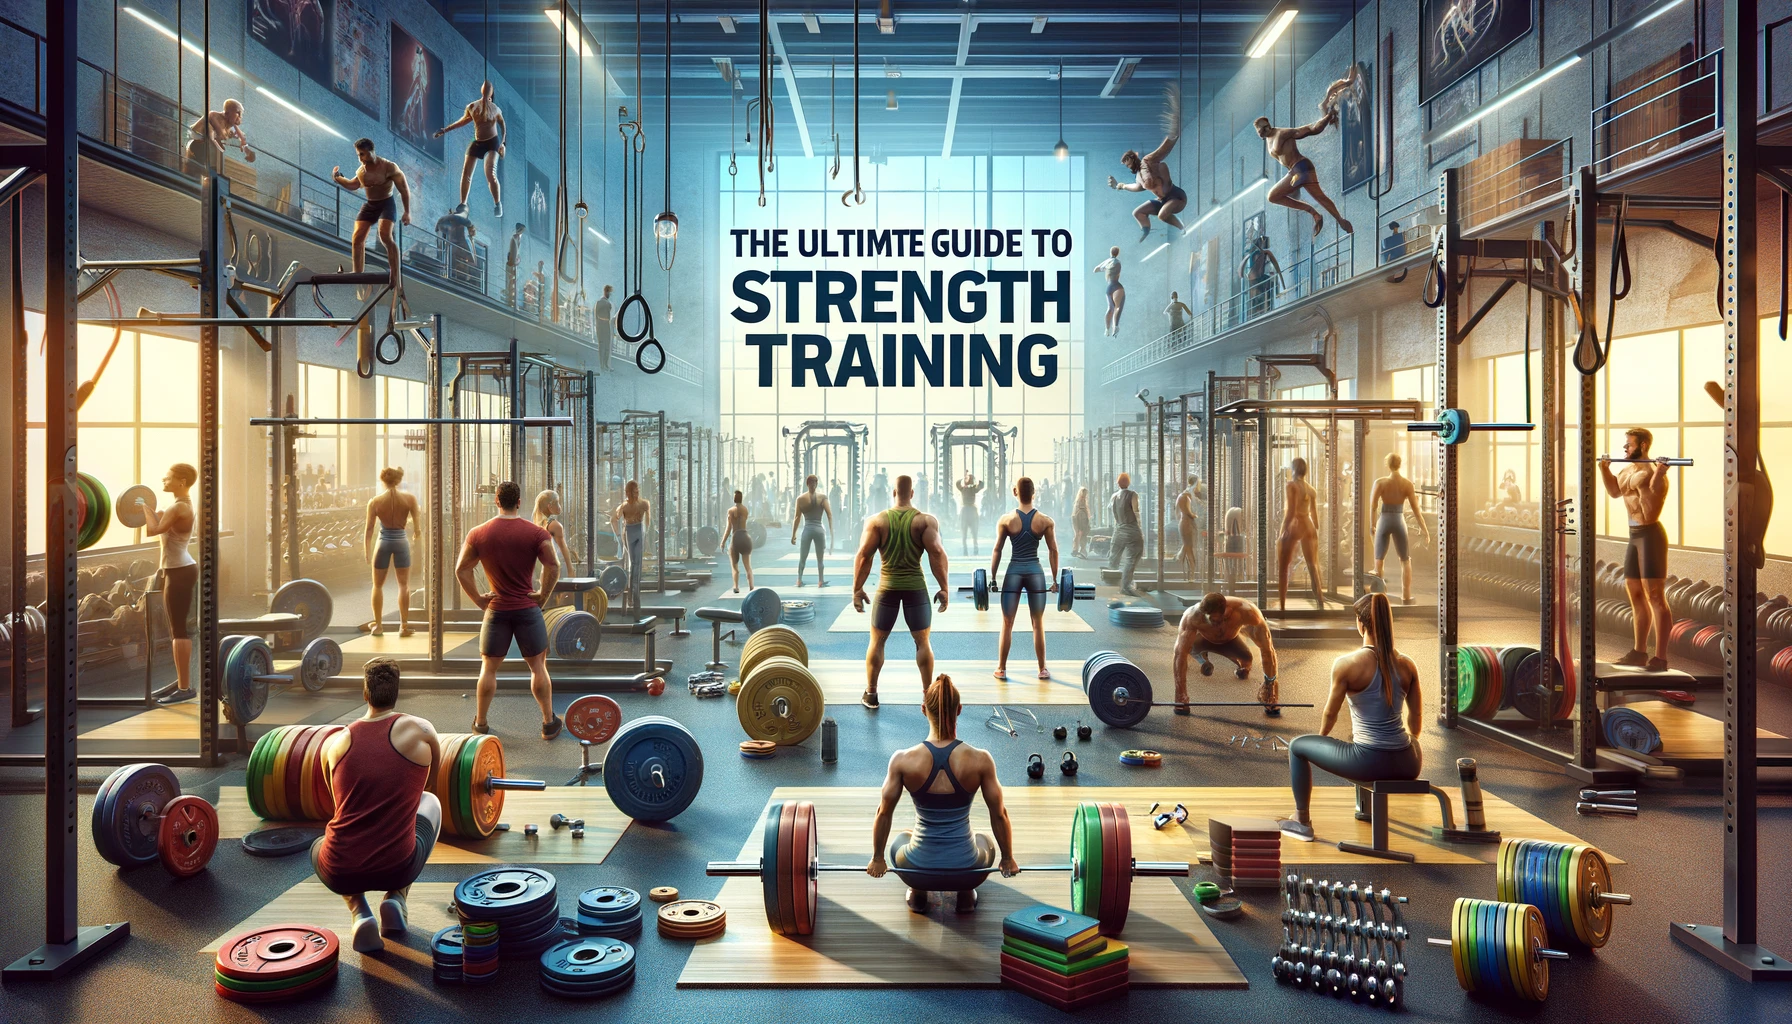 What Does The Ultimate Guide To Strength Training Cover?